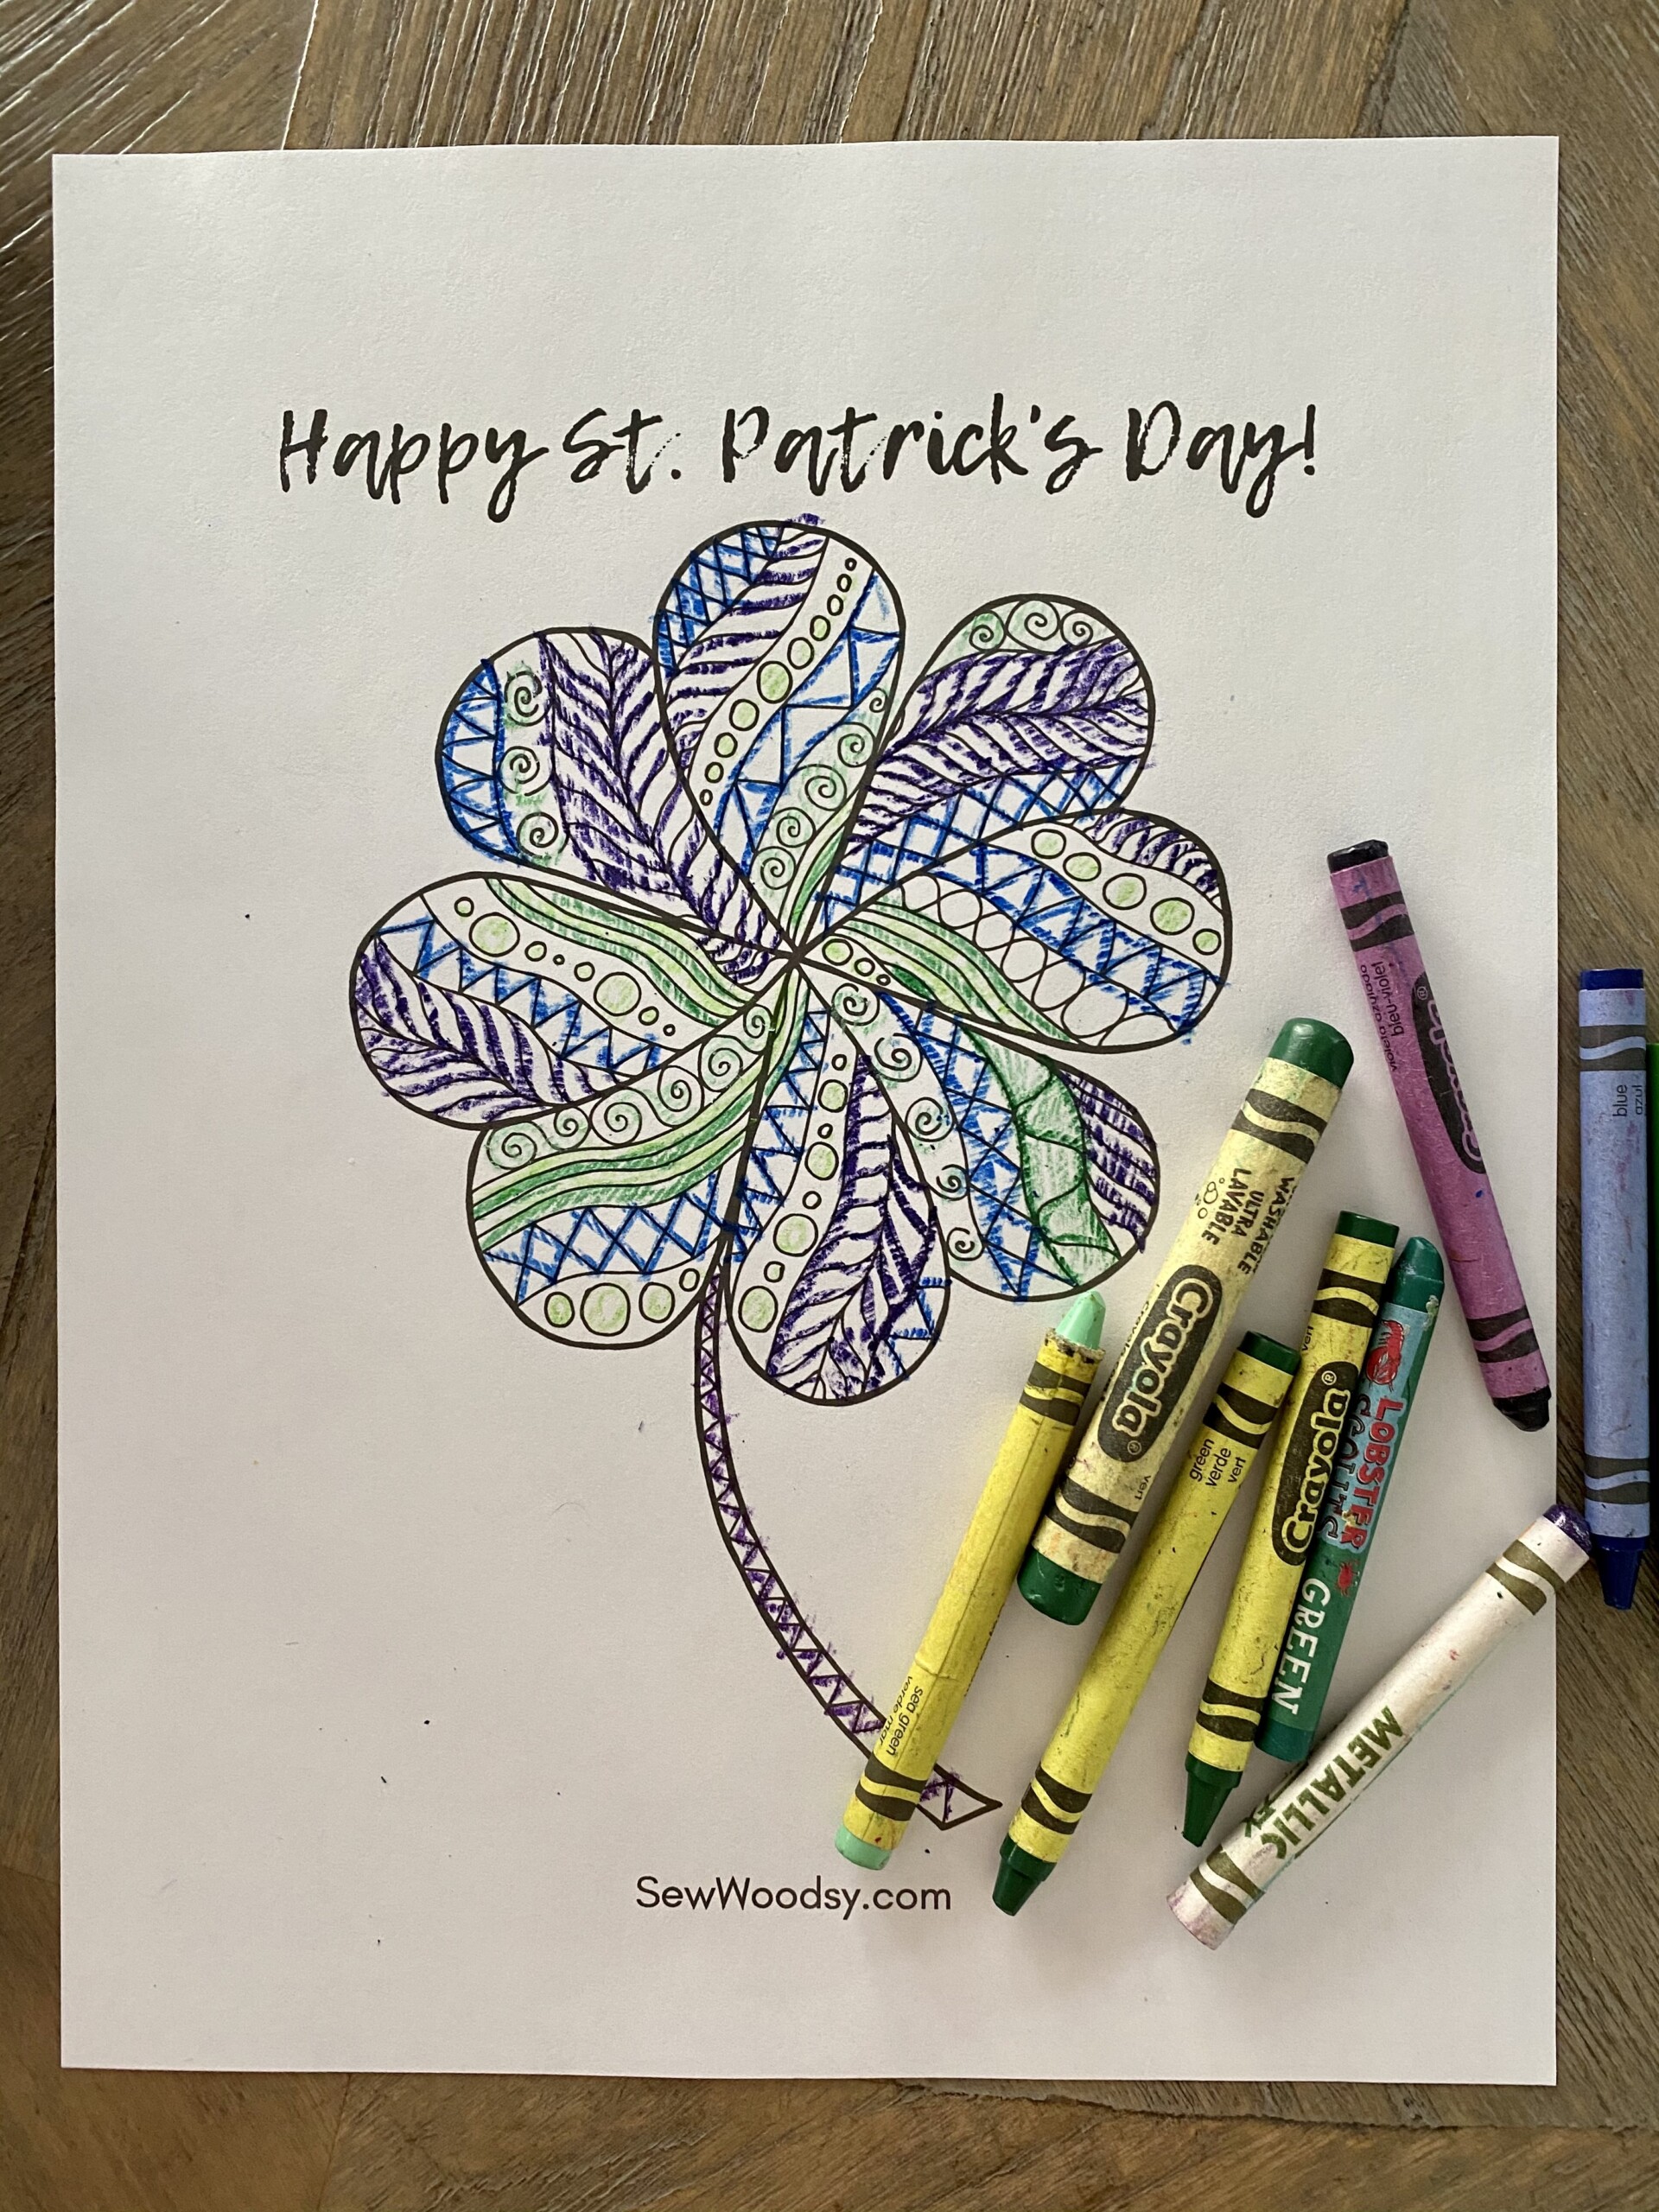 Coloring page with crayons on page that says "Happy St. Patrick's Day".